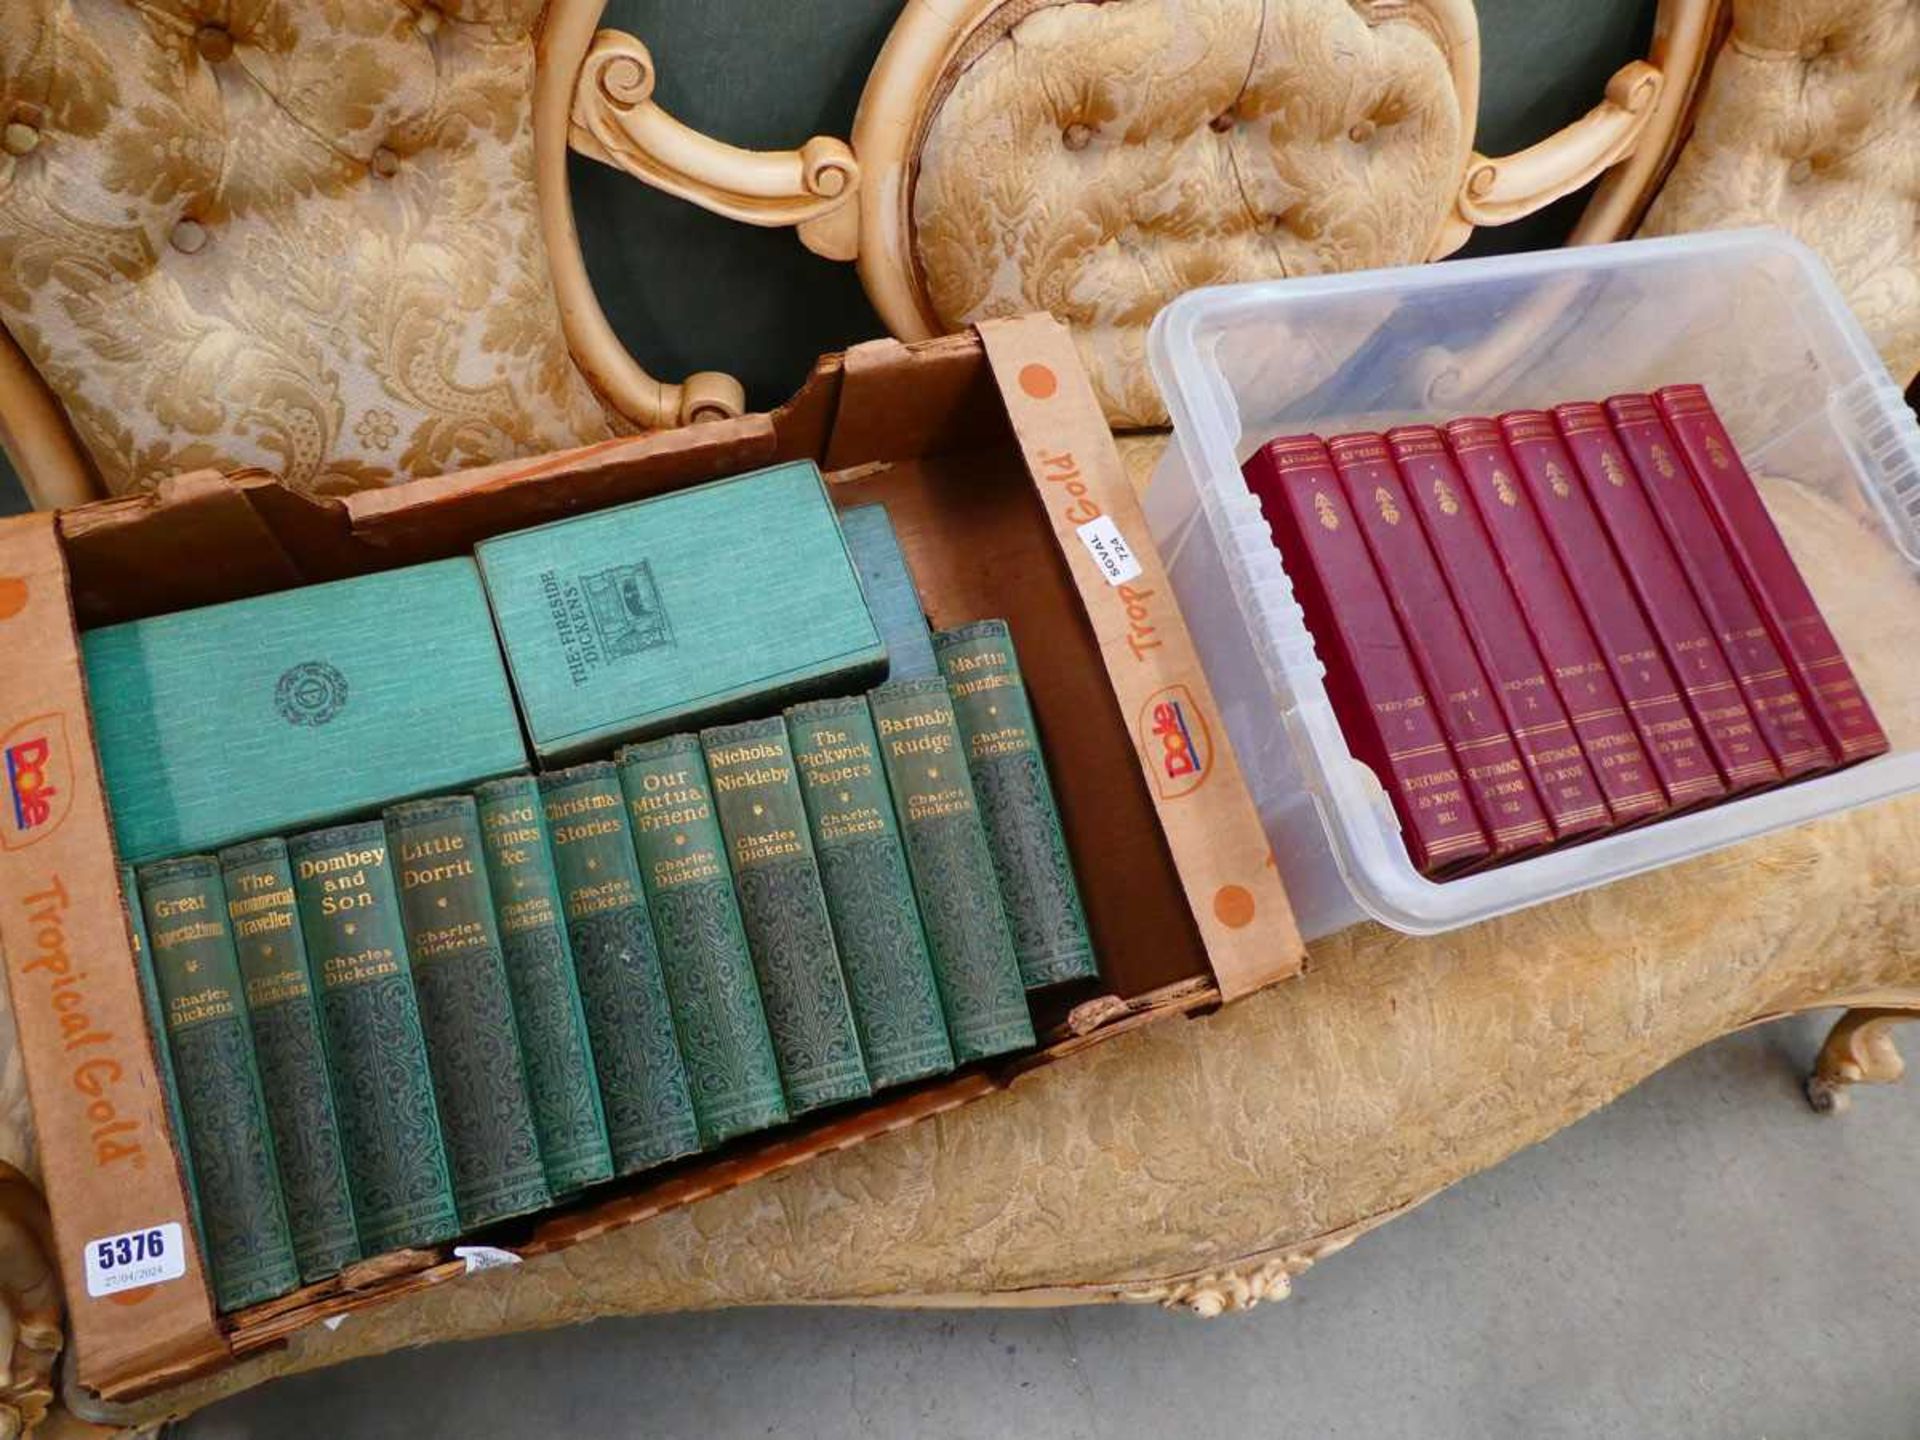 2 x boxes containing the works of Dickens (the fireside edition, 18 vols) plus The Book of Knowledge